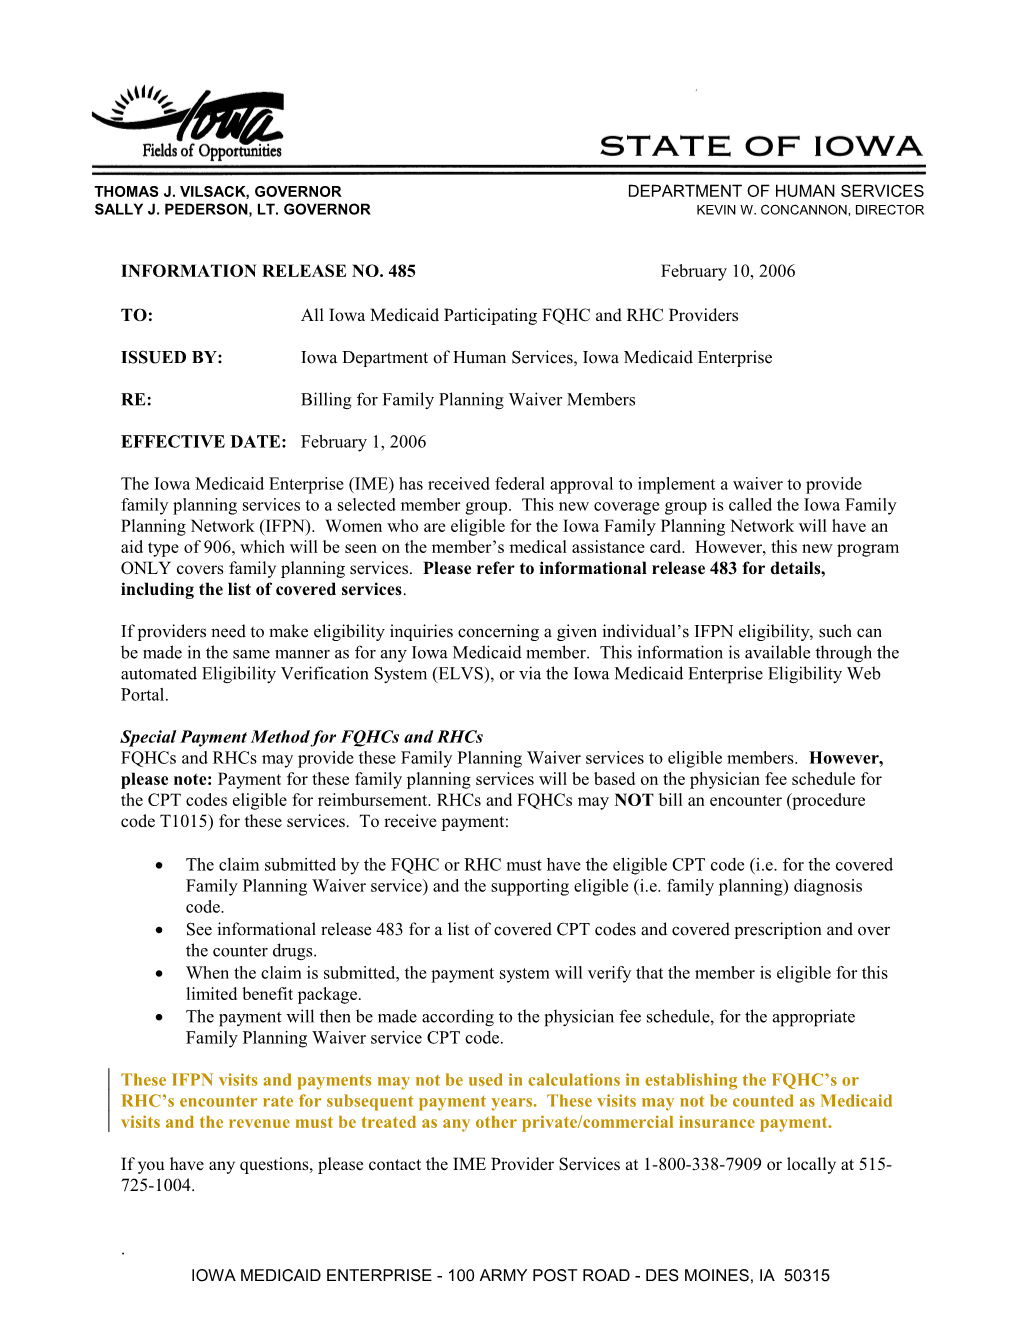 Department of Human Services Letterhead s6